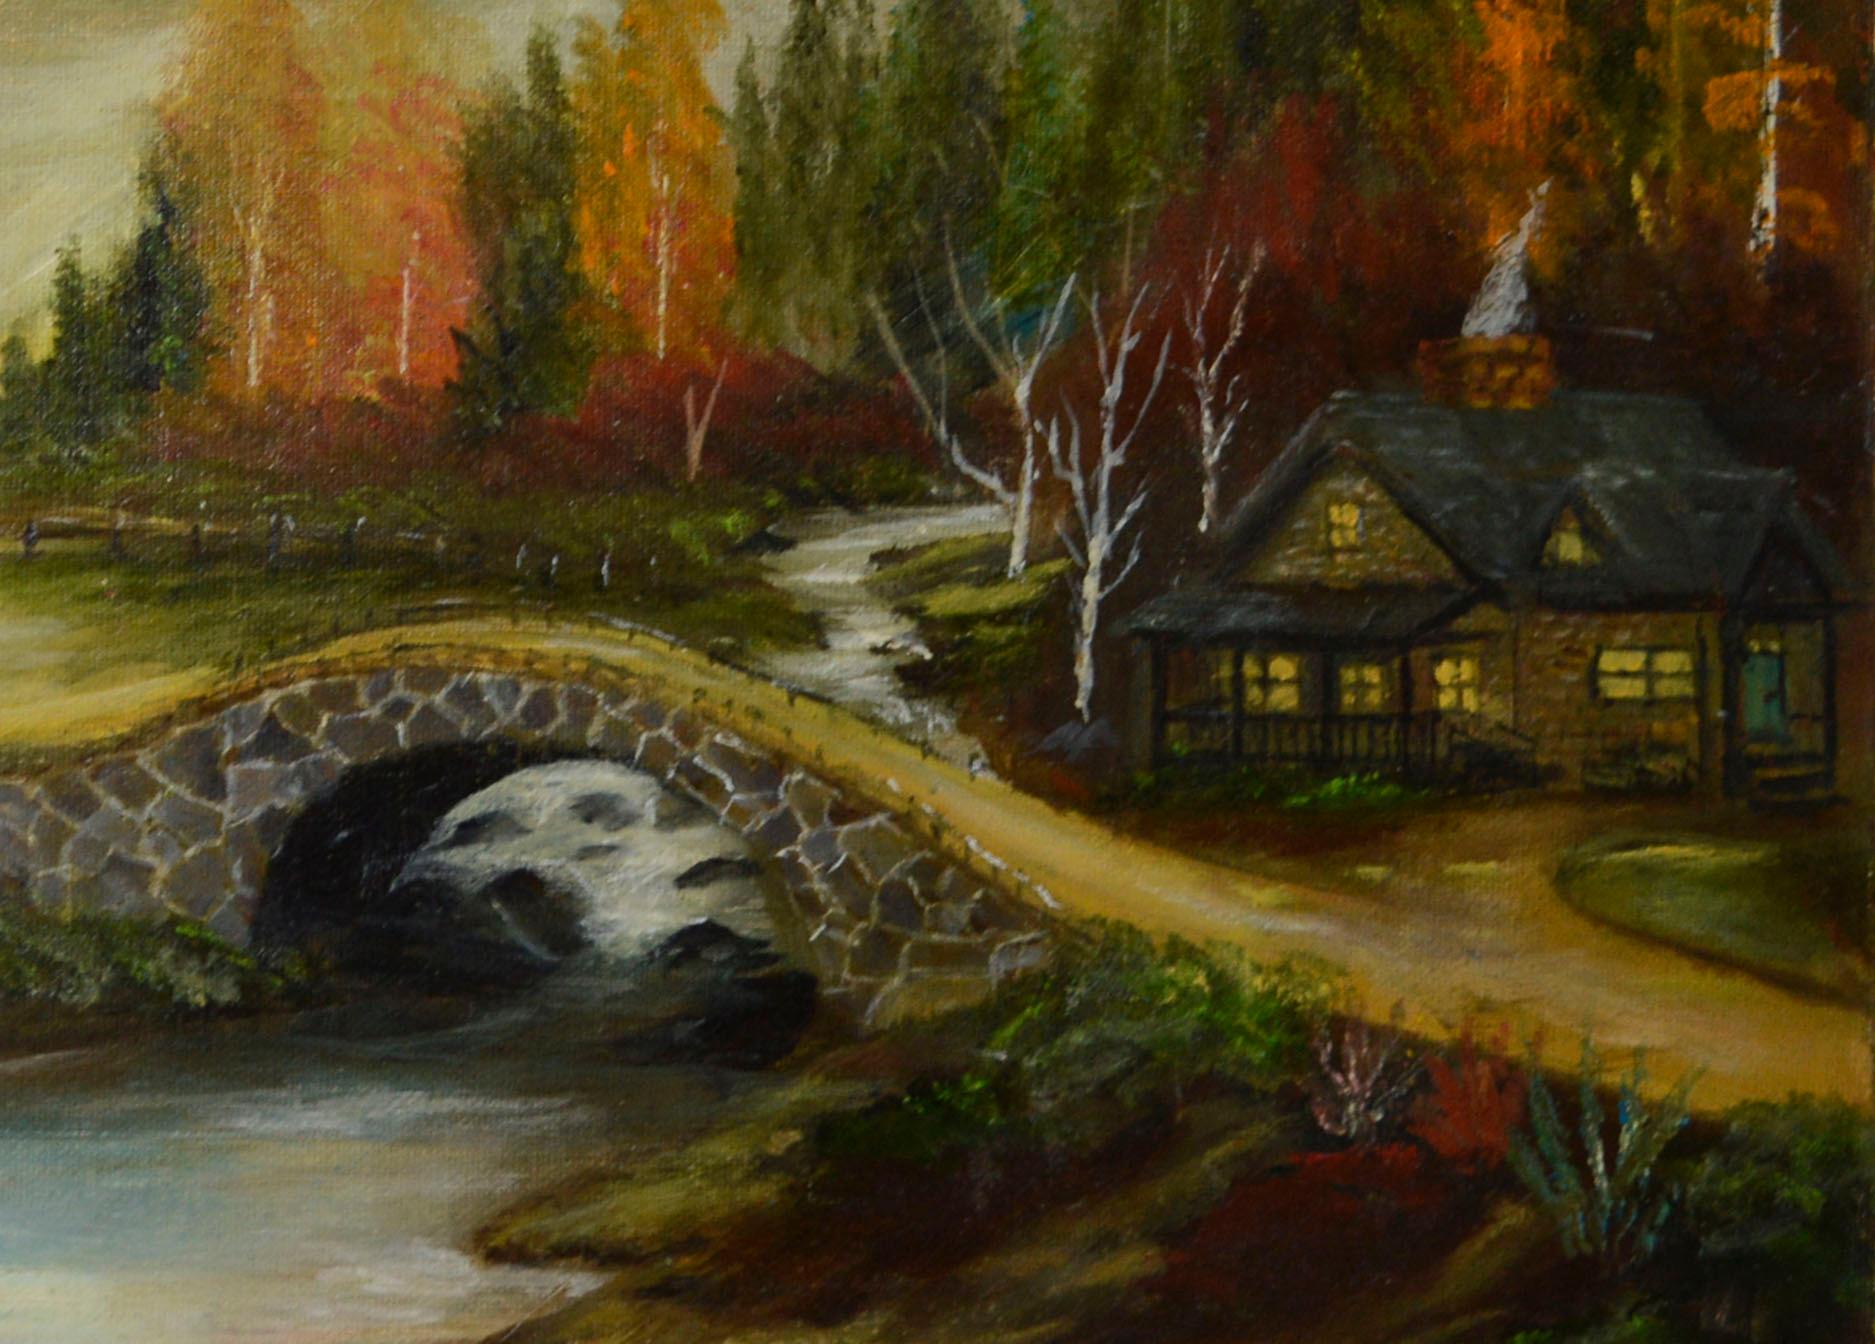 Cabin by the River, Autumn Landscape with Stone Bridge - Painting by Allen Jones